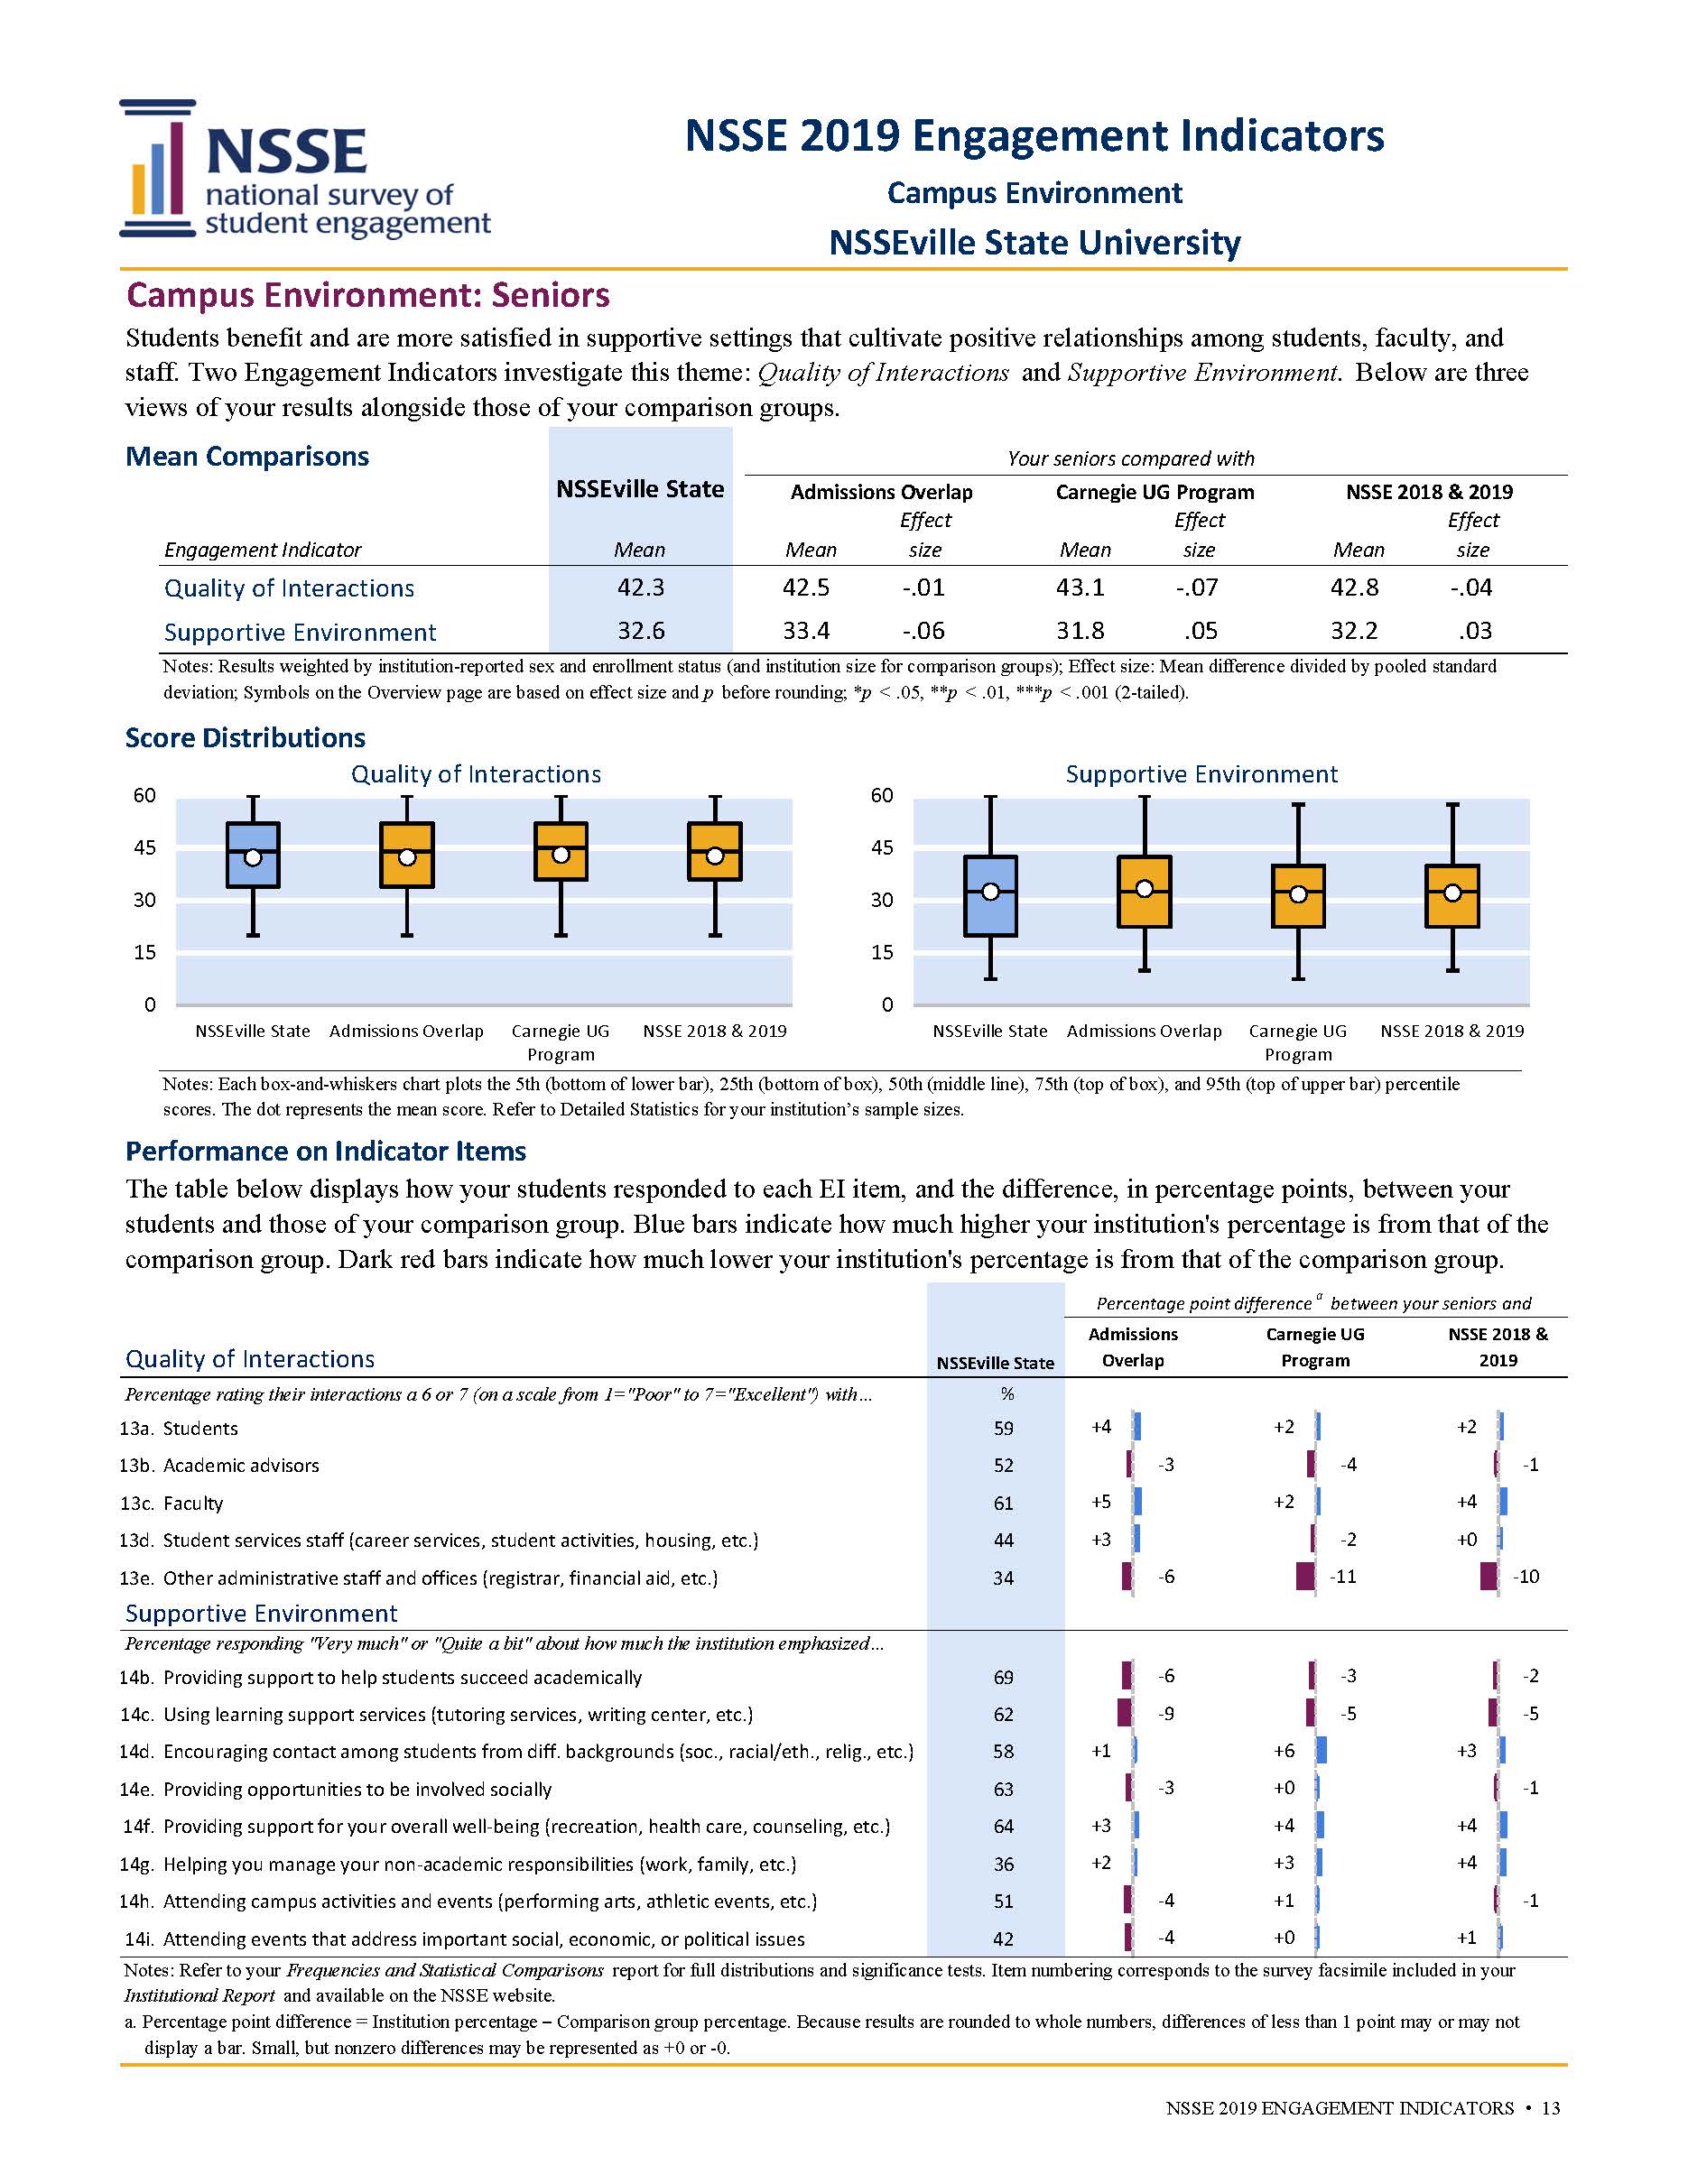 Sample Report: page 13 of NSSE Engagement Indicators